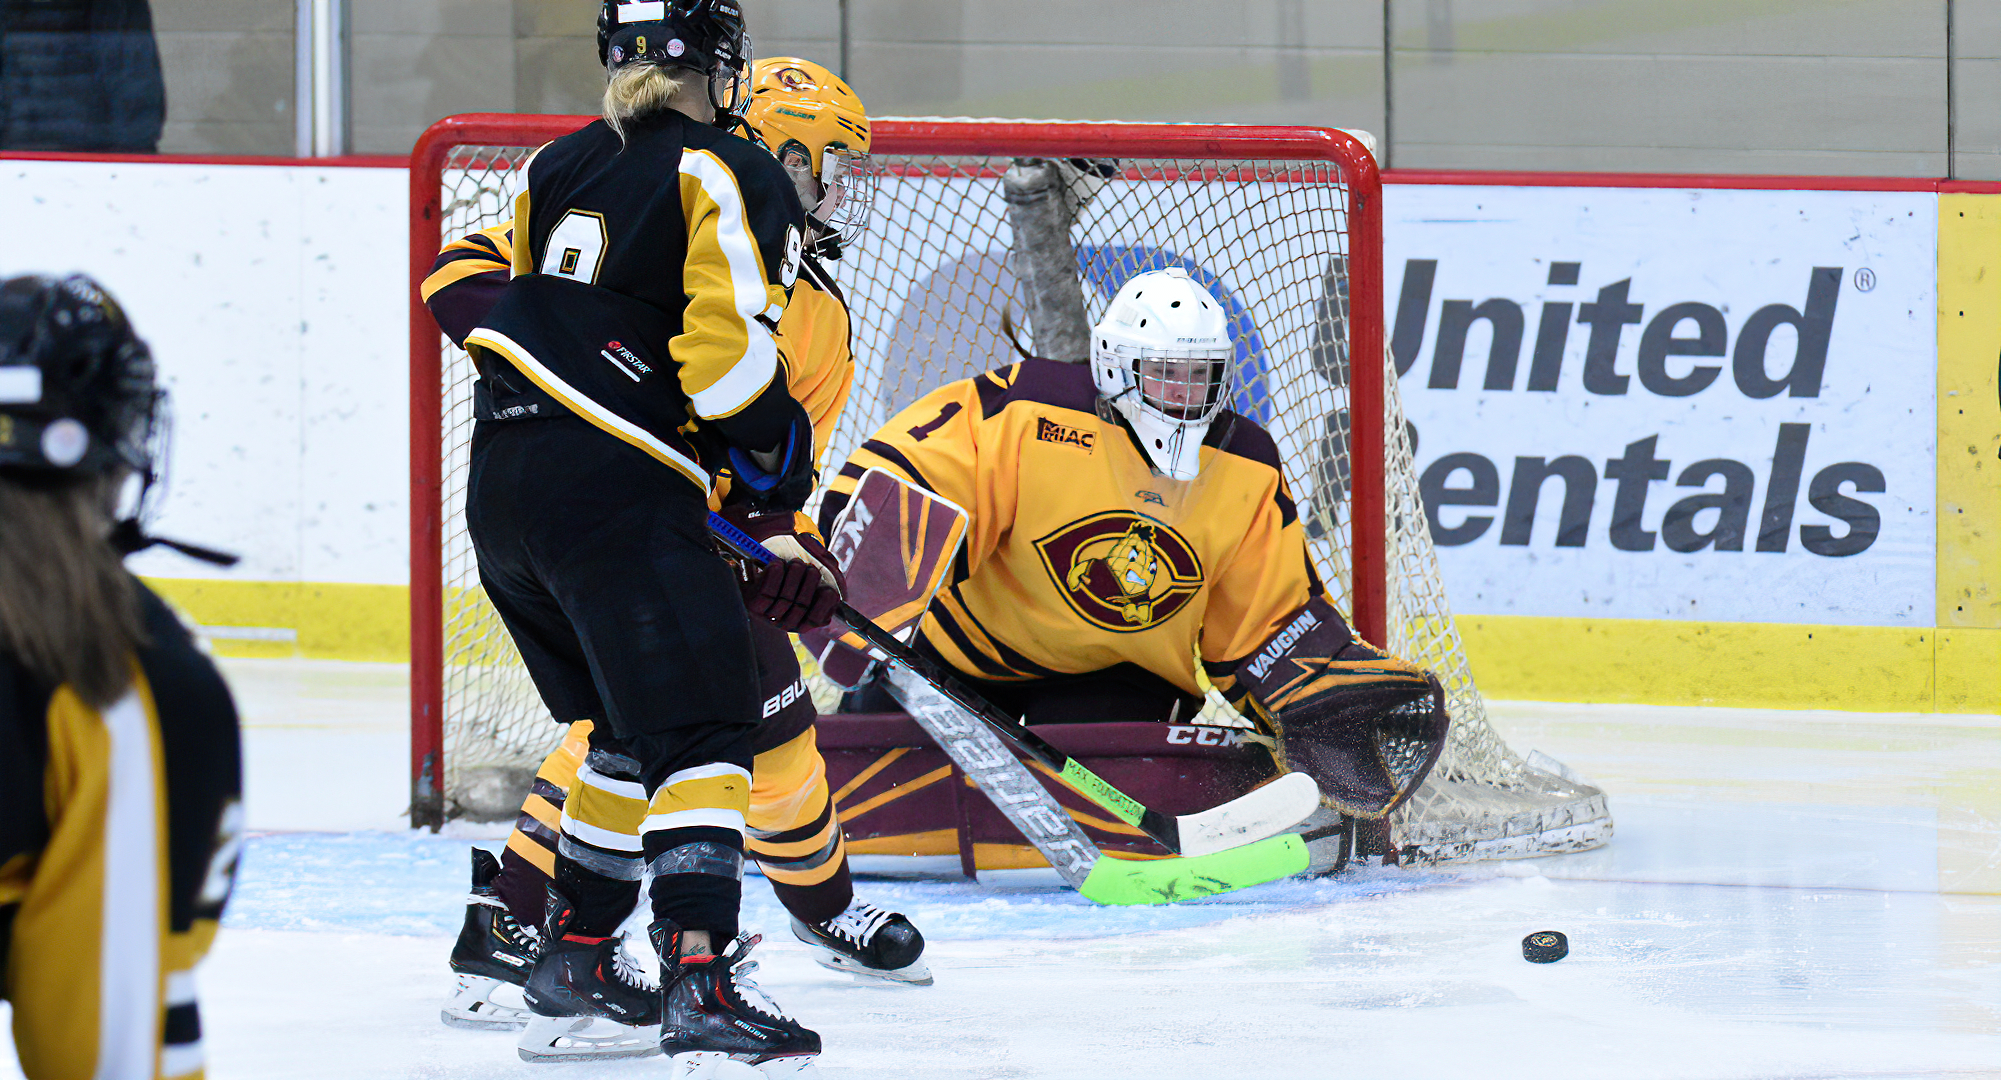 Senior goalie Kiana Flaig made 32 saves in the Cobbers' series finale at St. Olaf.